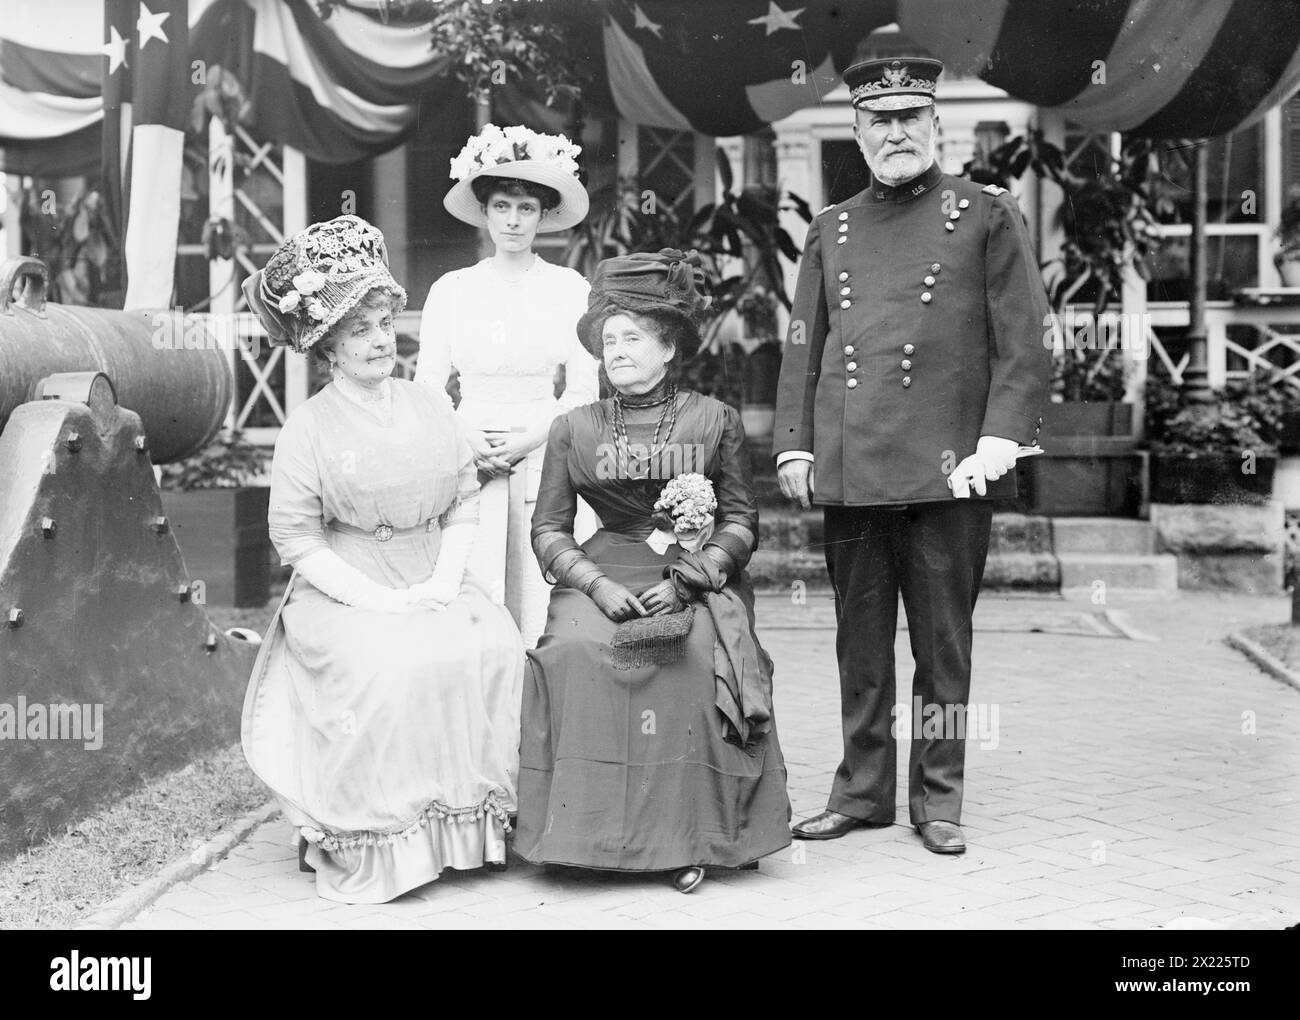 Mrs. F.D. Grant; Mrs. Francis M. Gibson; Mrs. U.S. Grant III; Gen. F.D. Grant, 1911. Shows General Frederick Dent Grant, commanding officer on Governors Island, with his wife (Ida Marie Honorie Grant), Mrs. U.S. Grant III (Edith Root), and Mrs. Francis Marion Gibson. Event is probably the annual lawn party sponsored by the Army Relief Society, which raised money for widows and orphans of officers and enlisted men of the regular army. (Source: Flickr Commons project, 2009) Forms part of: George Grantham Bain Collection (Library of Congress). Title from data provided by the Bain News Service on Stock Photo